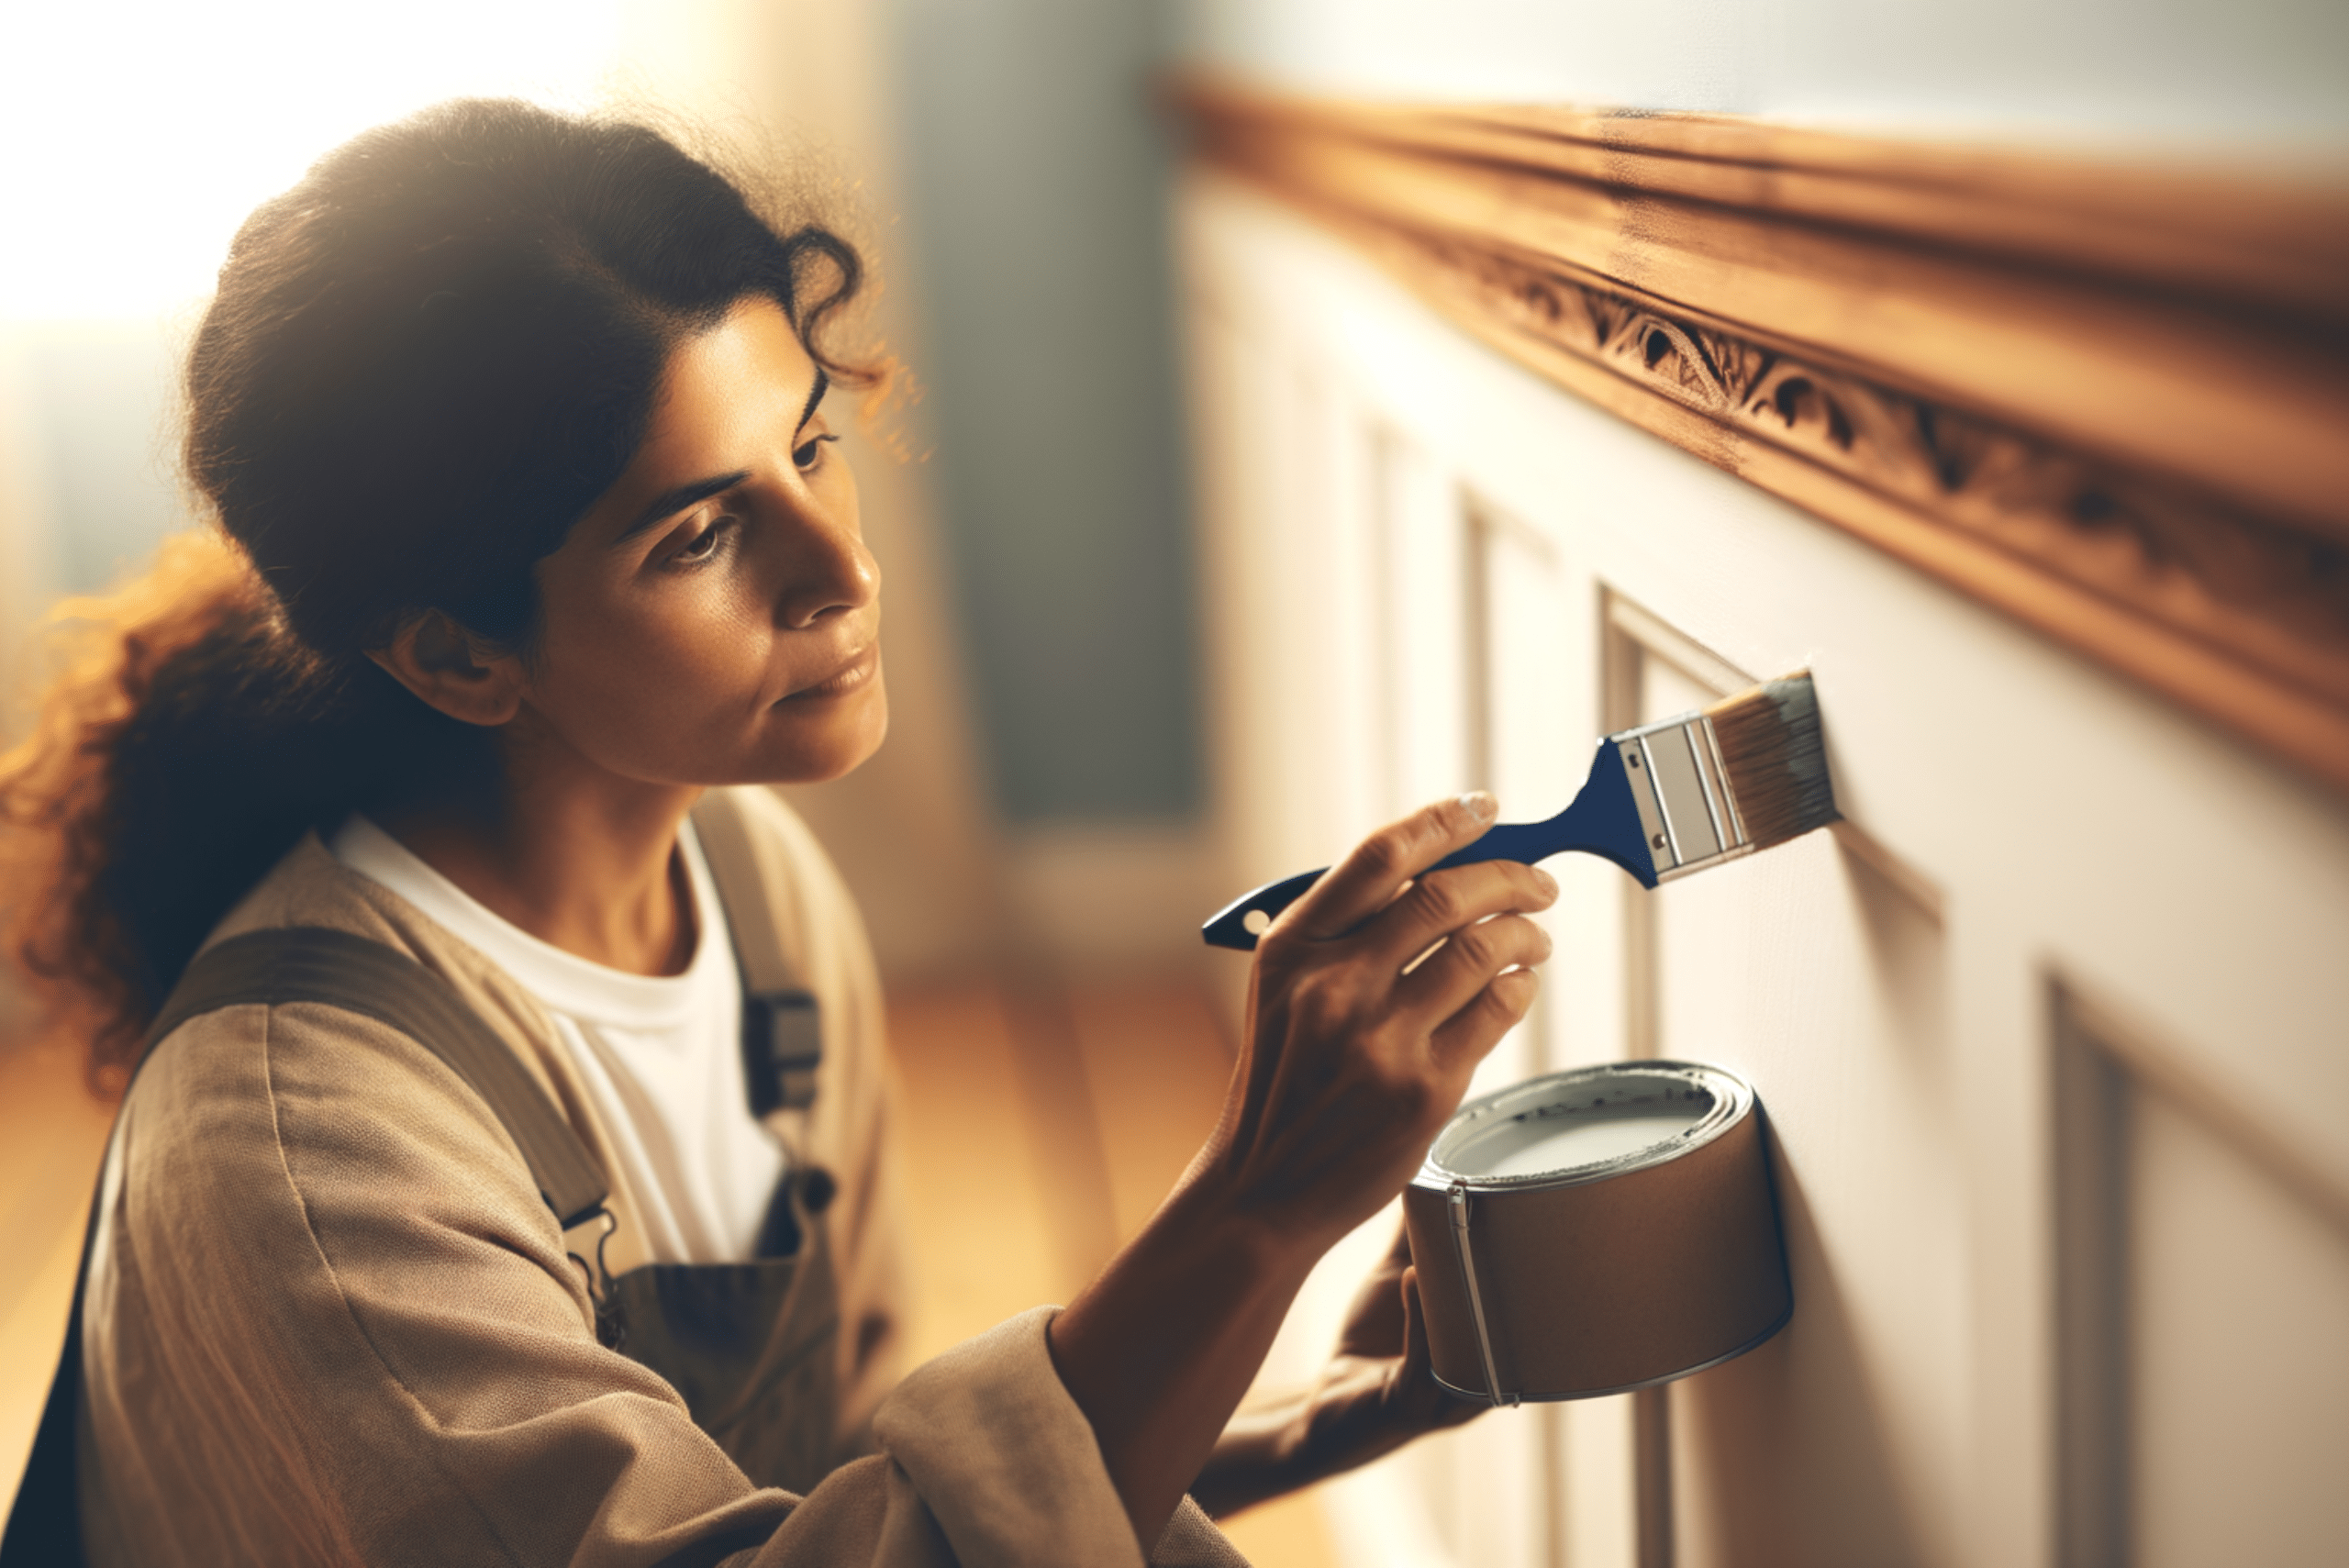 Person using a brush to paint trim while holding a can of paint in the other hand.